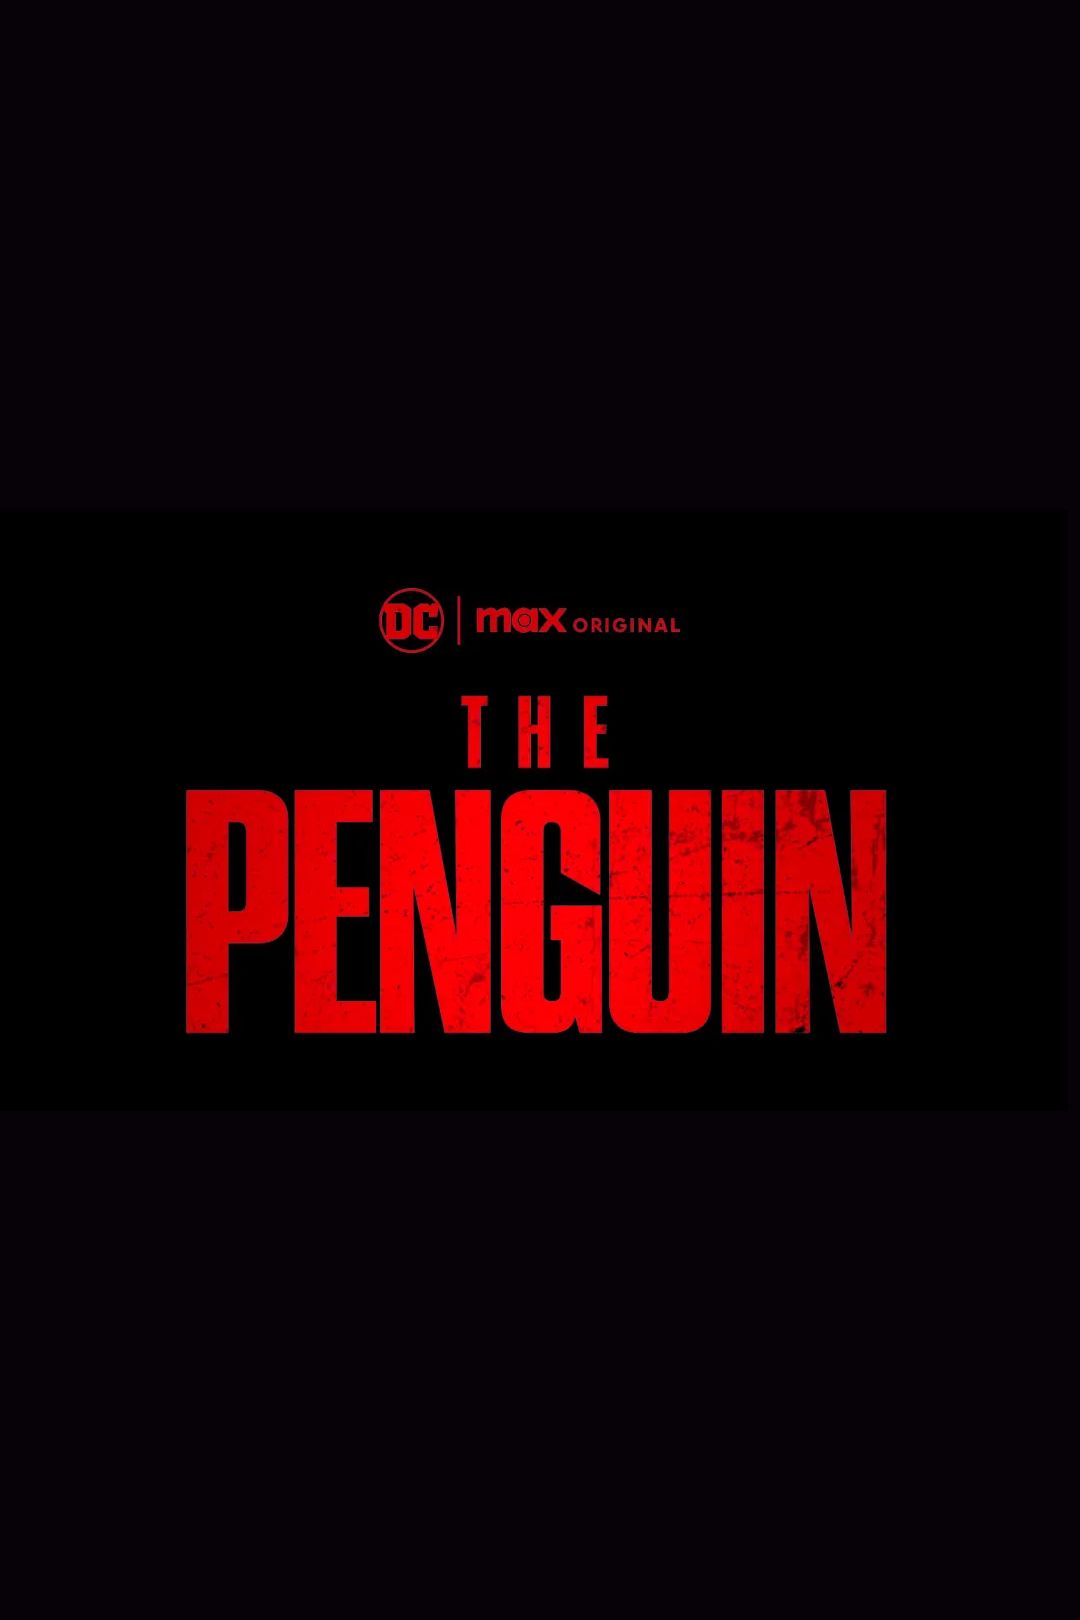 The logo of the TV series “Penguin Max”